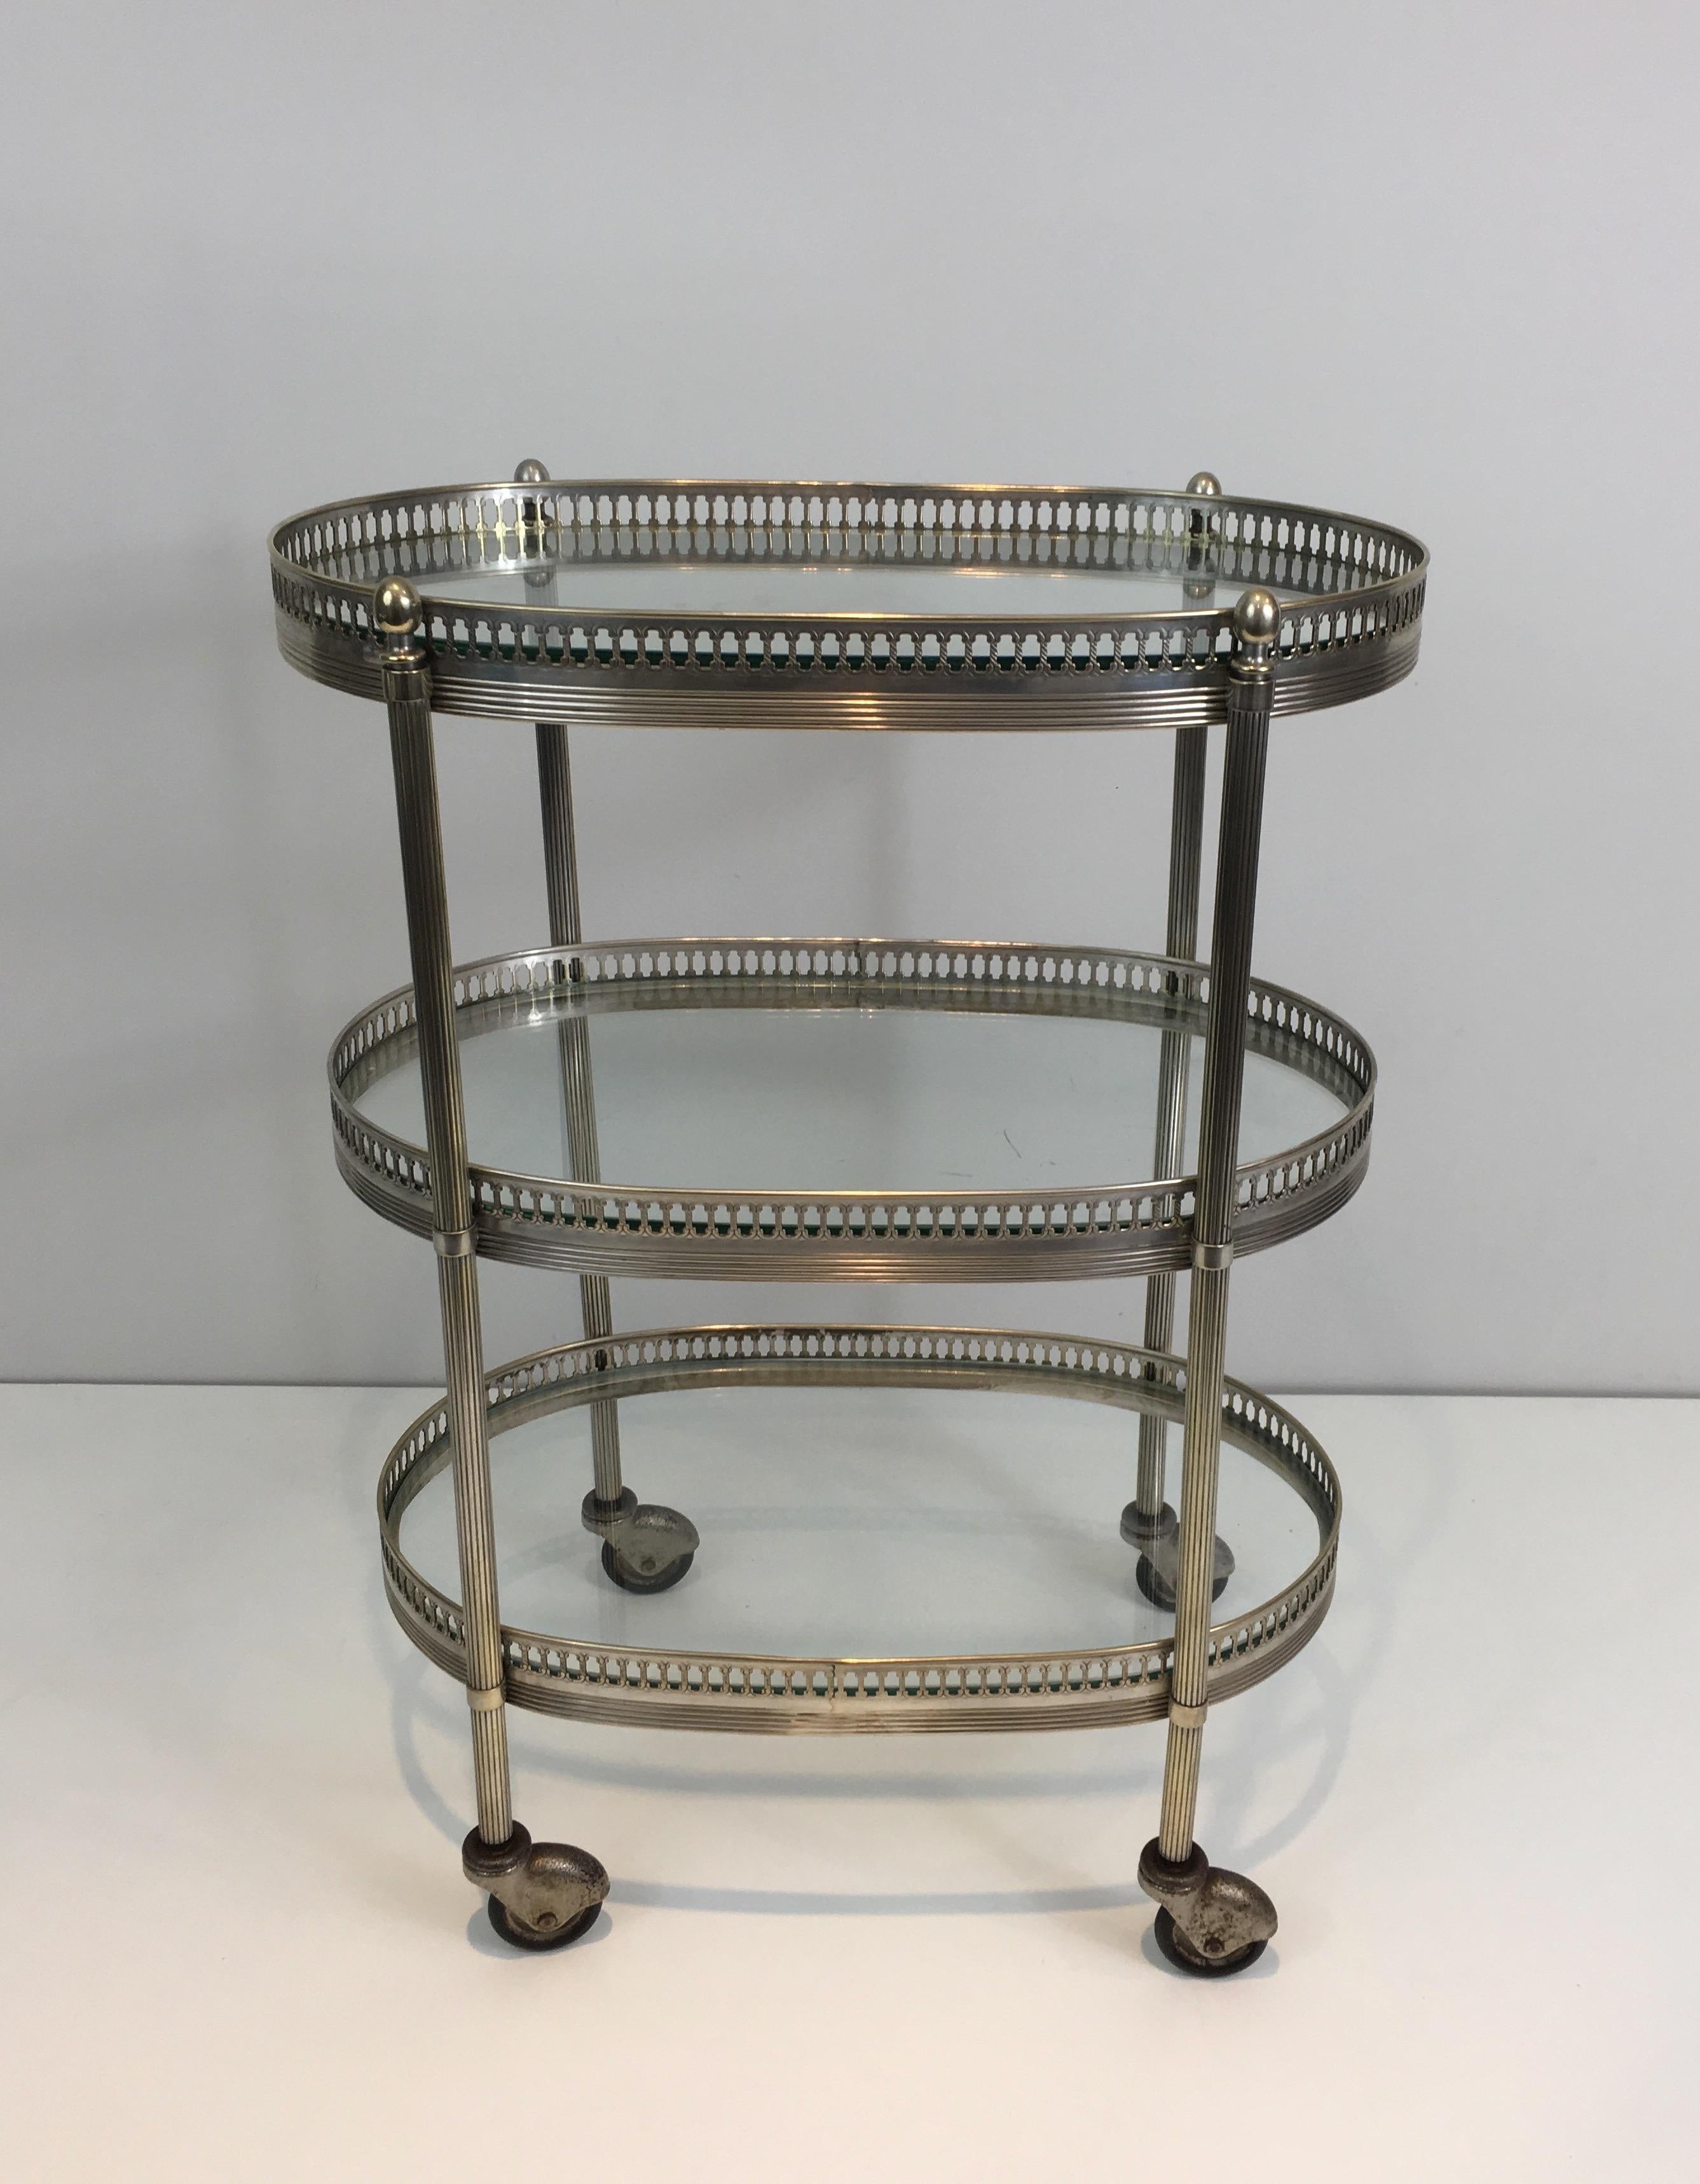 This neoclassical oval bar cart is made of silver plated on brass. This drinks trolley has 3 oval glass shelves. This is French work in the style of Maison Jansen, circa 1940.